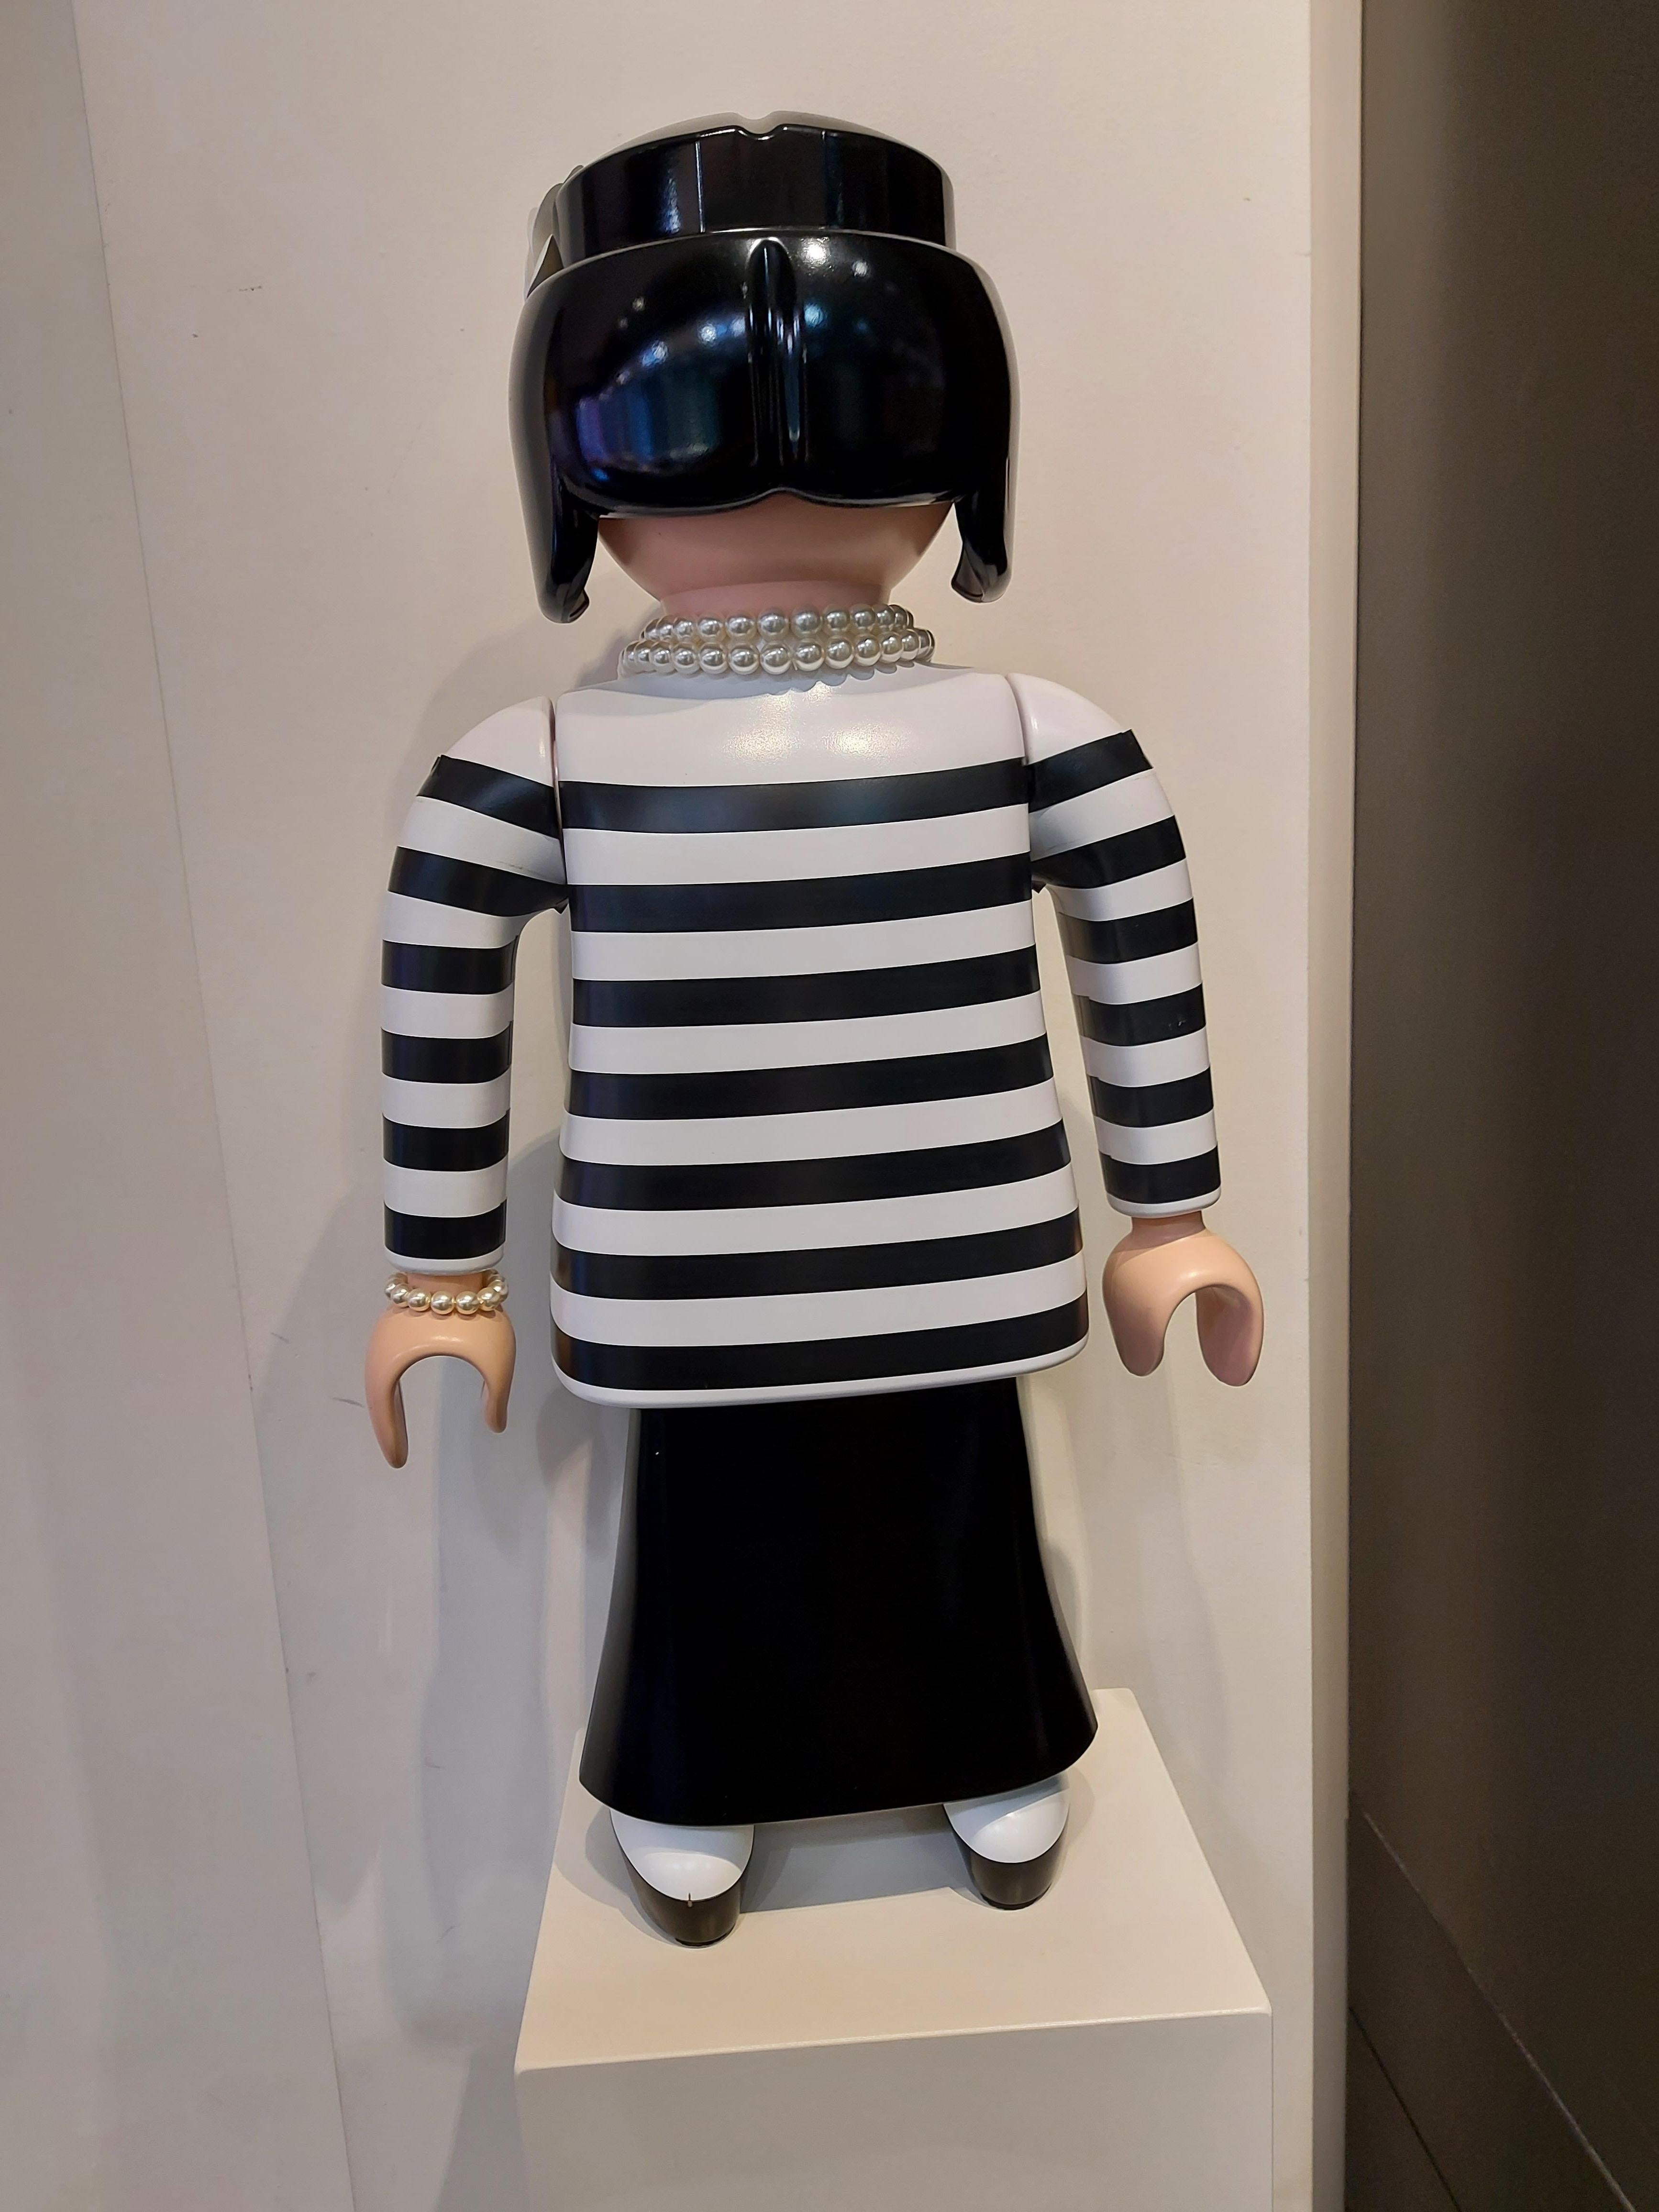 Artist Playmobil / Chanel Figure by Pache 